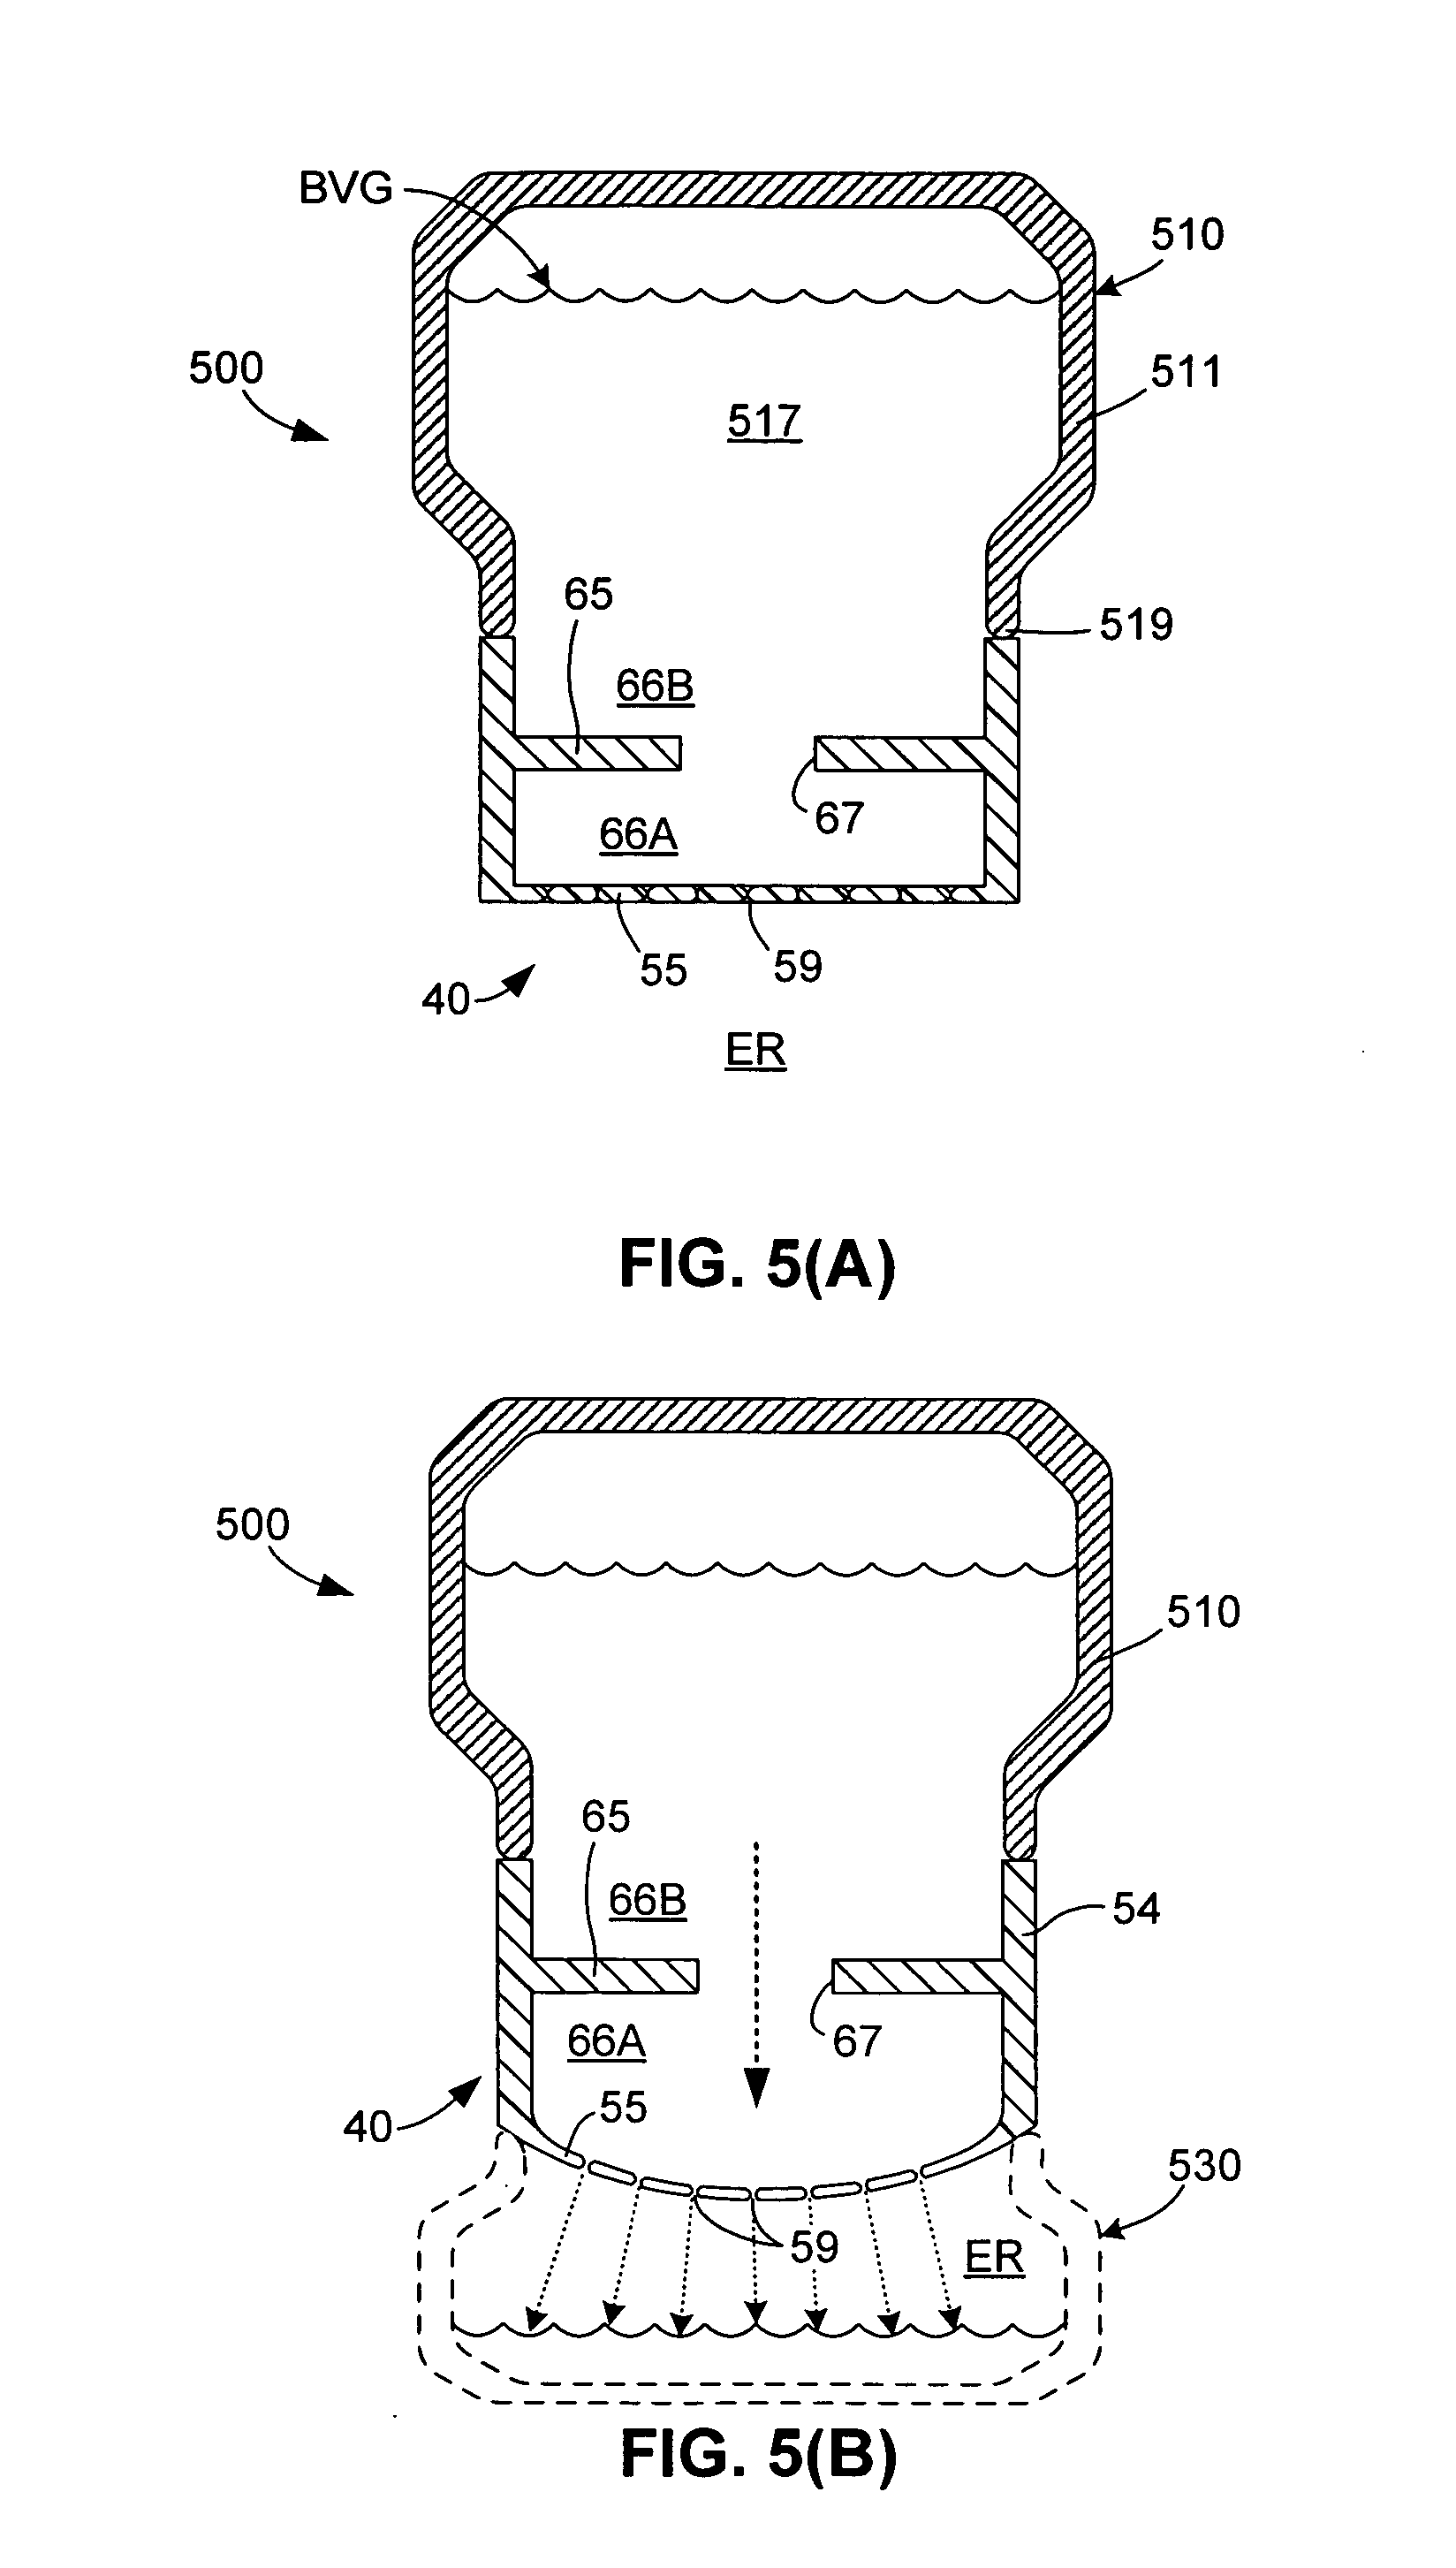 Non-spill container with flow control structure including baffle and elastic membrane having normally-closed pinholes